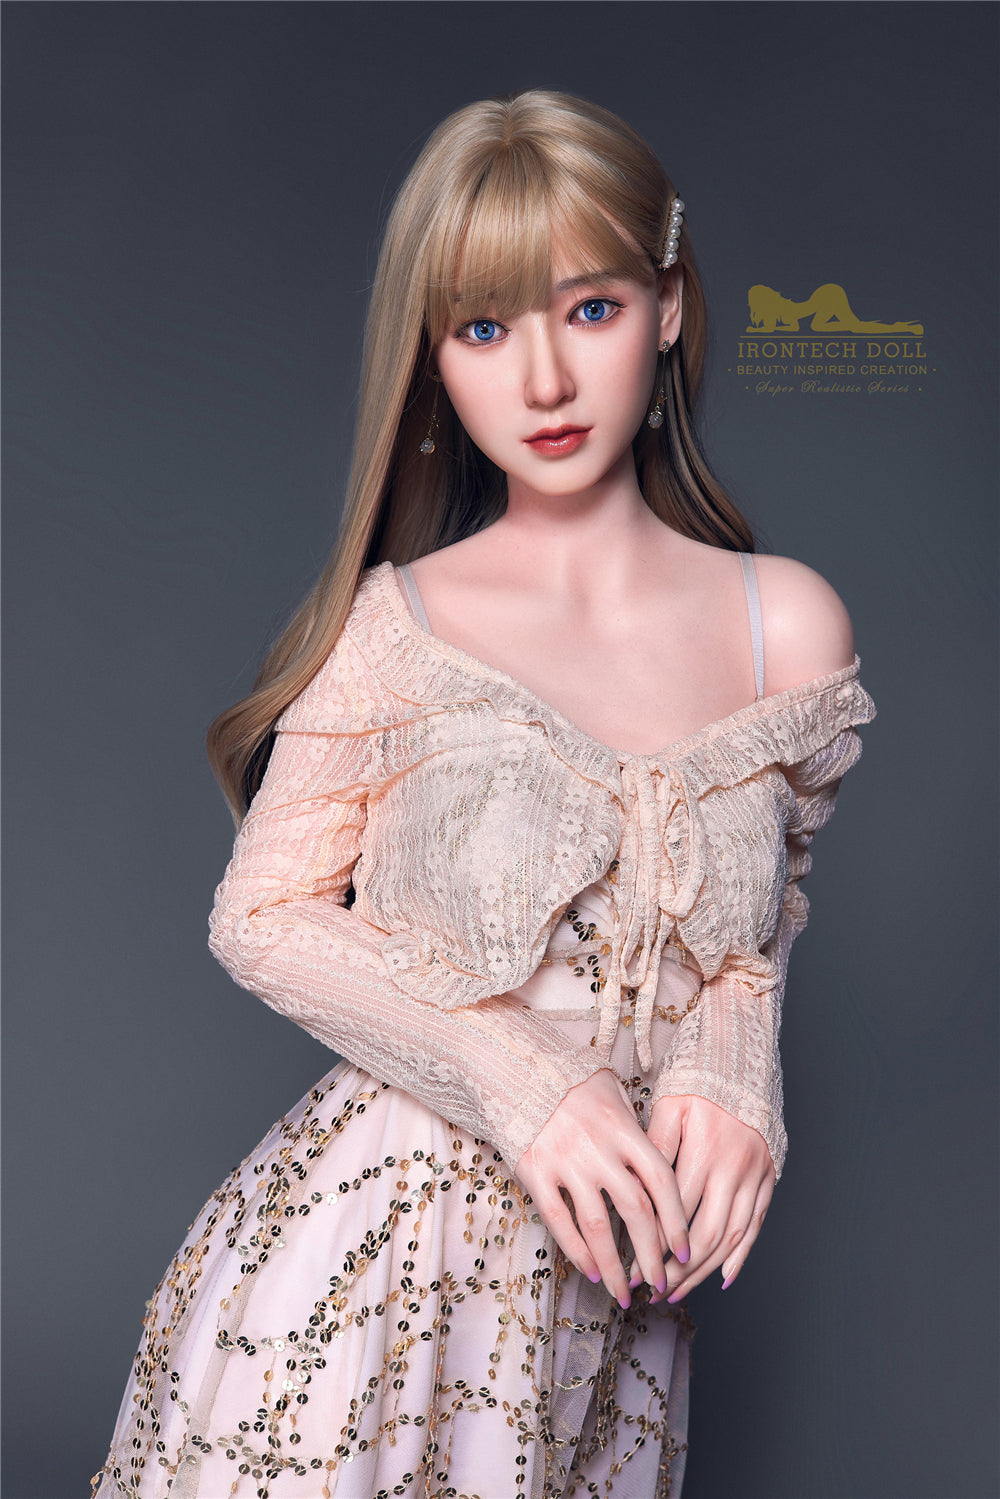 F1200-152cm-37.5kg Cupped Japanese Candy Flat Chest Silicone Sex Doll|Irontech Doll